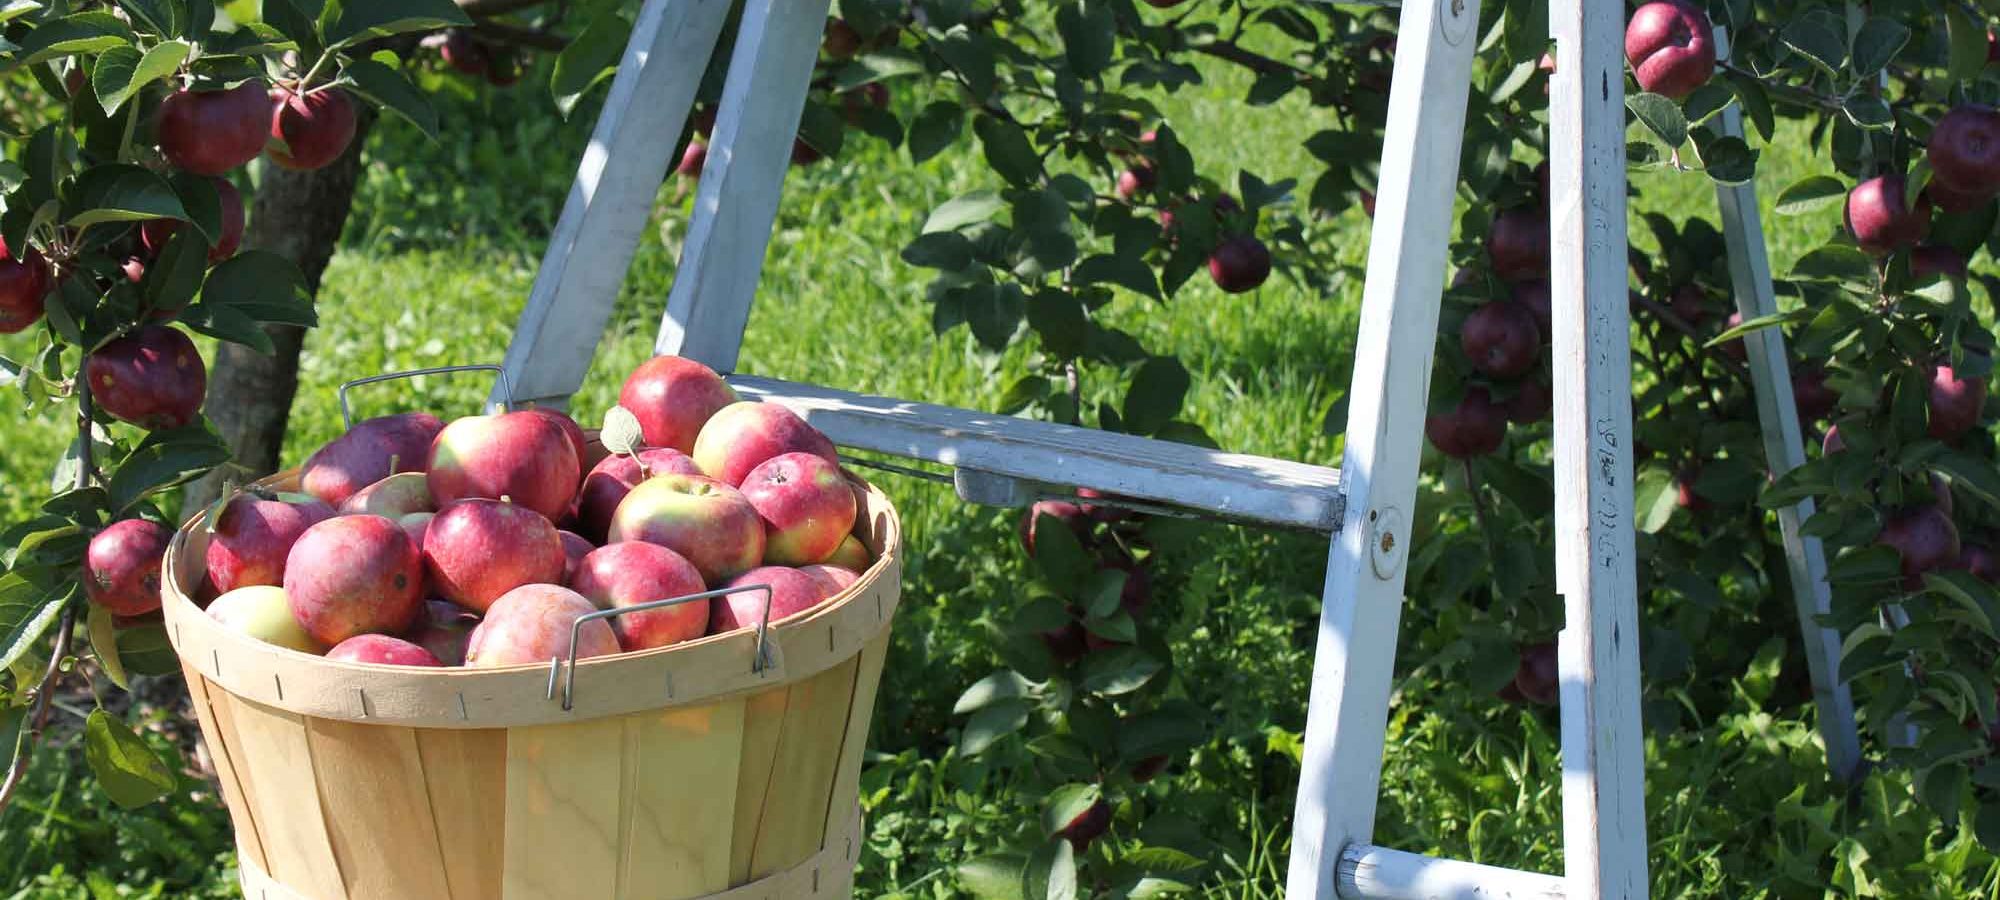 Pick-your-own fruits, vegetables and more